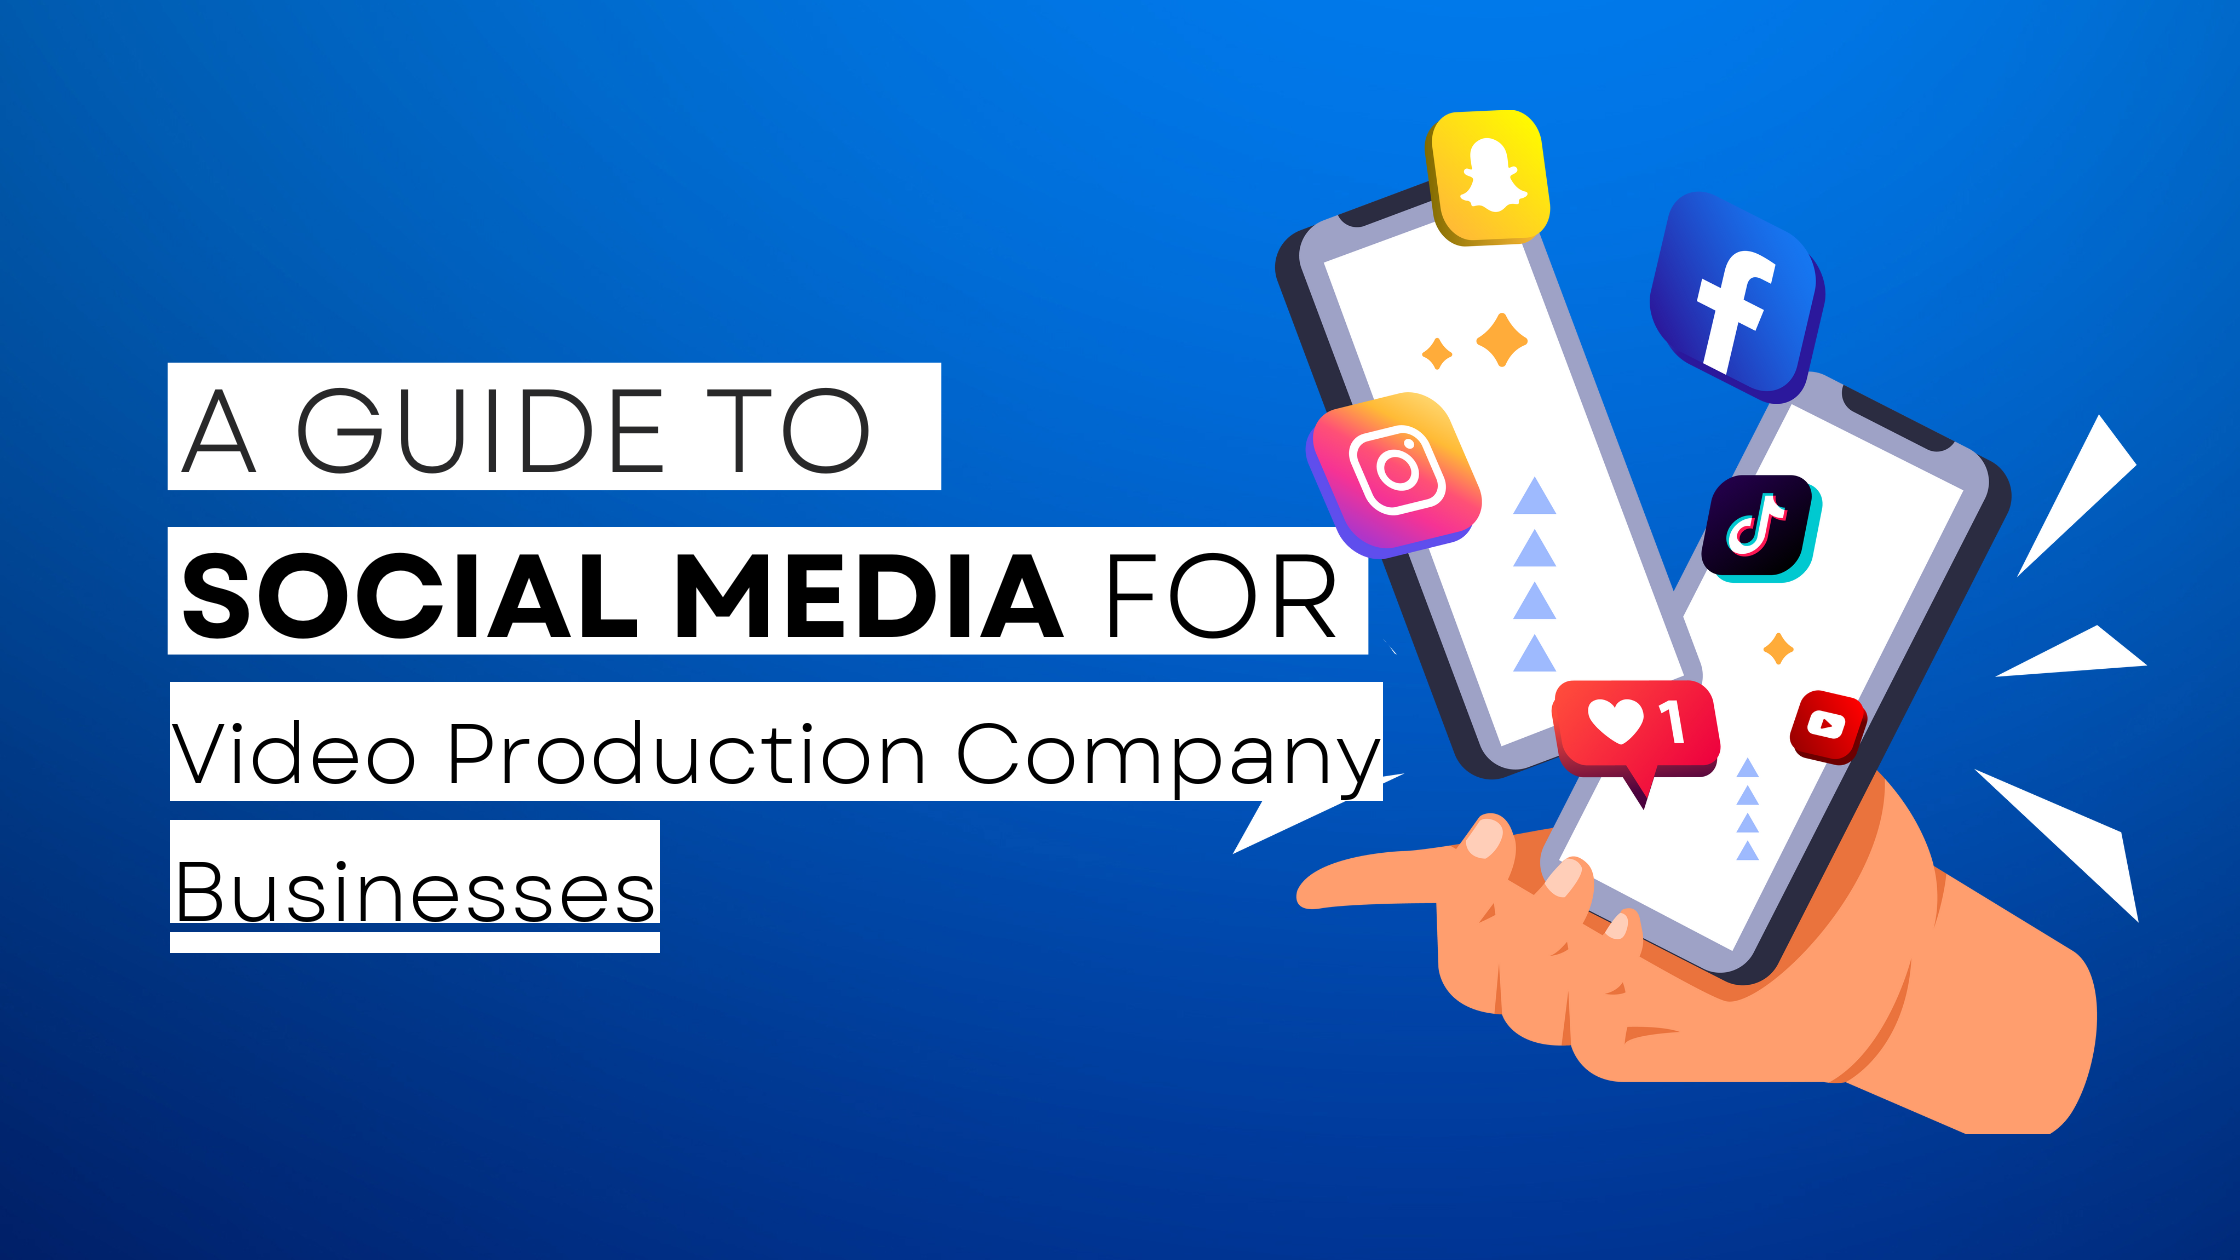 How to start Video Production Company on social media